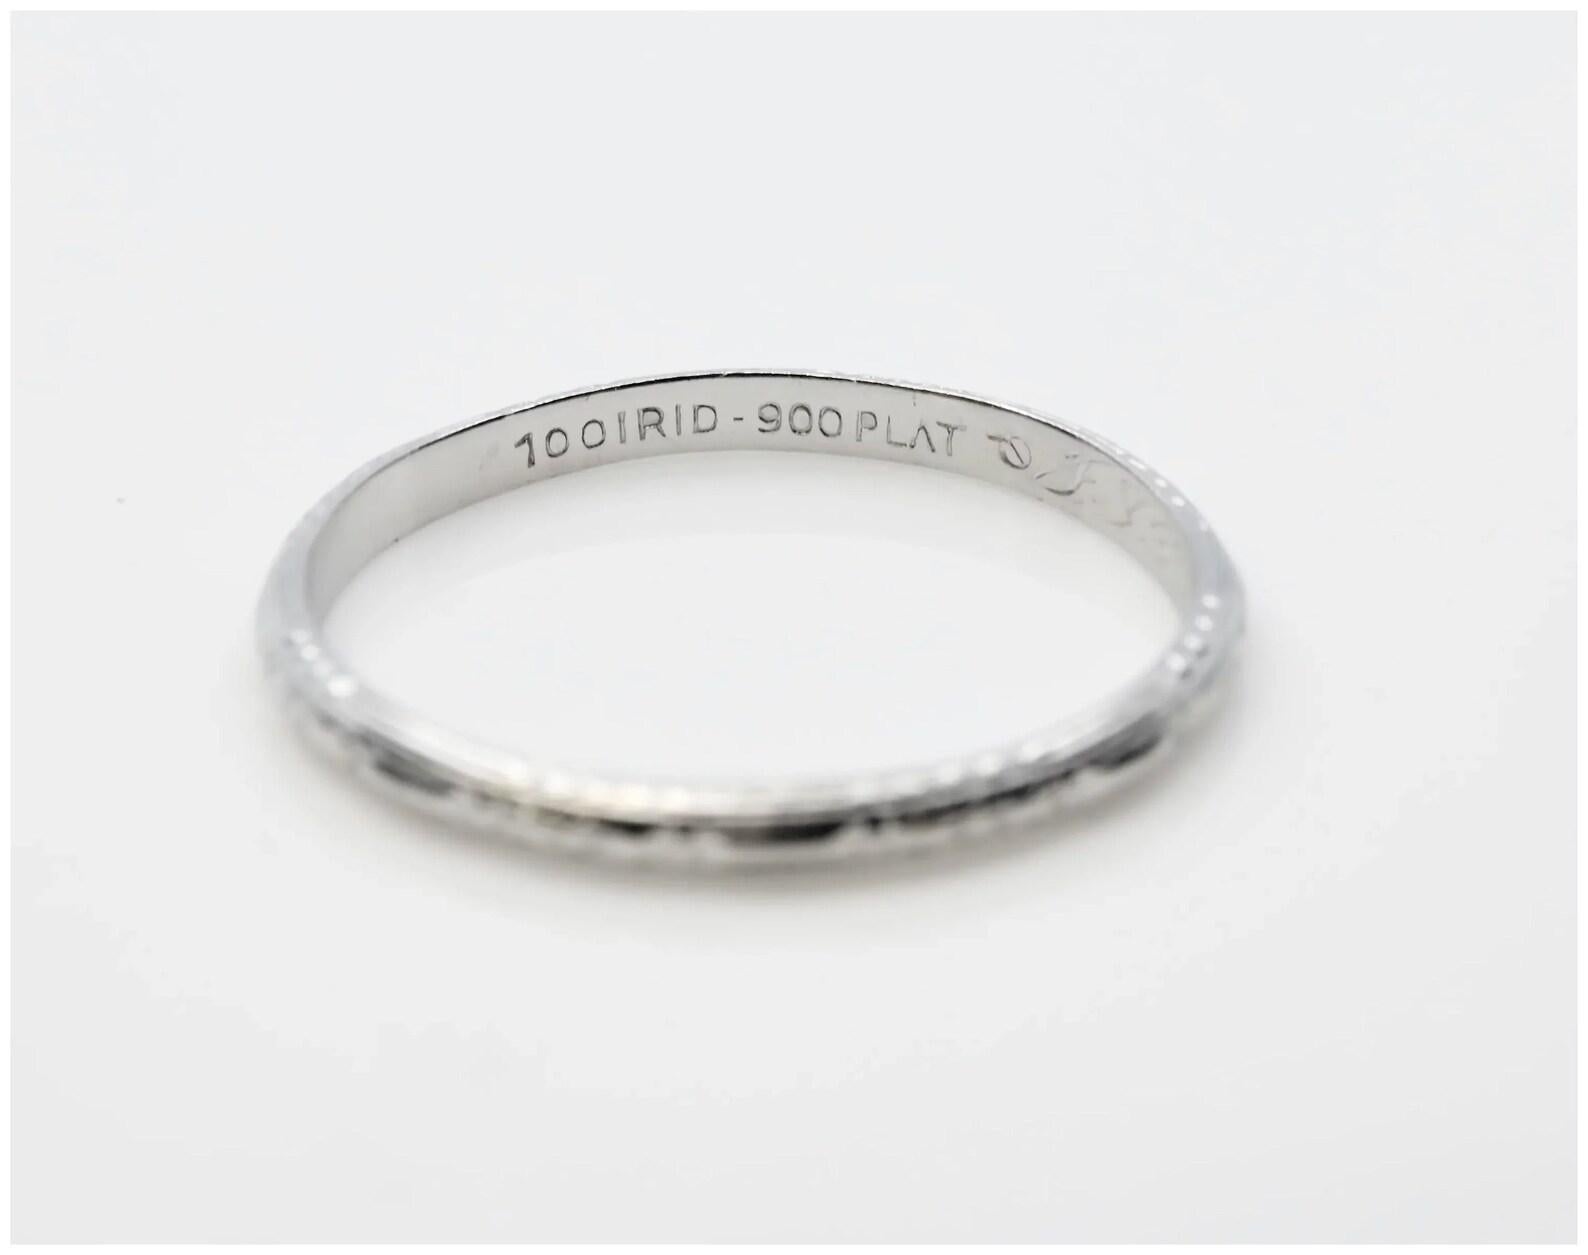 An original handmade Art Deco period platinum wedding band. In excellent condition, this circa 1932 platinum band measures 2mm wide and features beautiful hand engraving throughout.

This ring is a size 6 3/4, and should not be resized. Ring tests